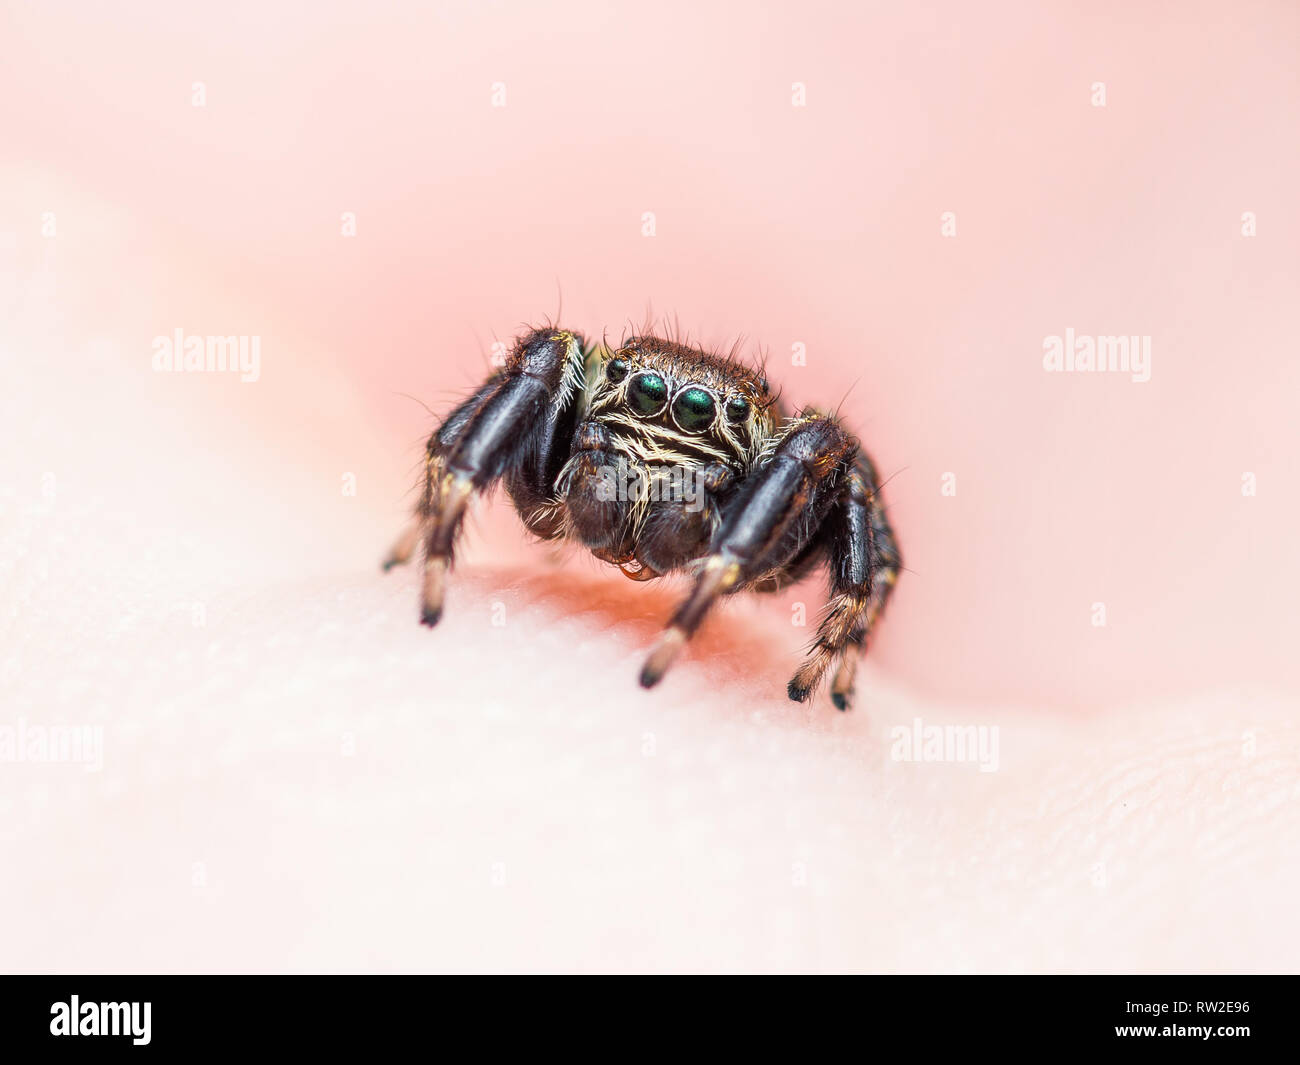 Jumping Spider Arachnid Insect Macro Stock Photo